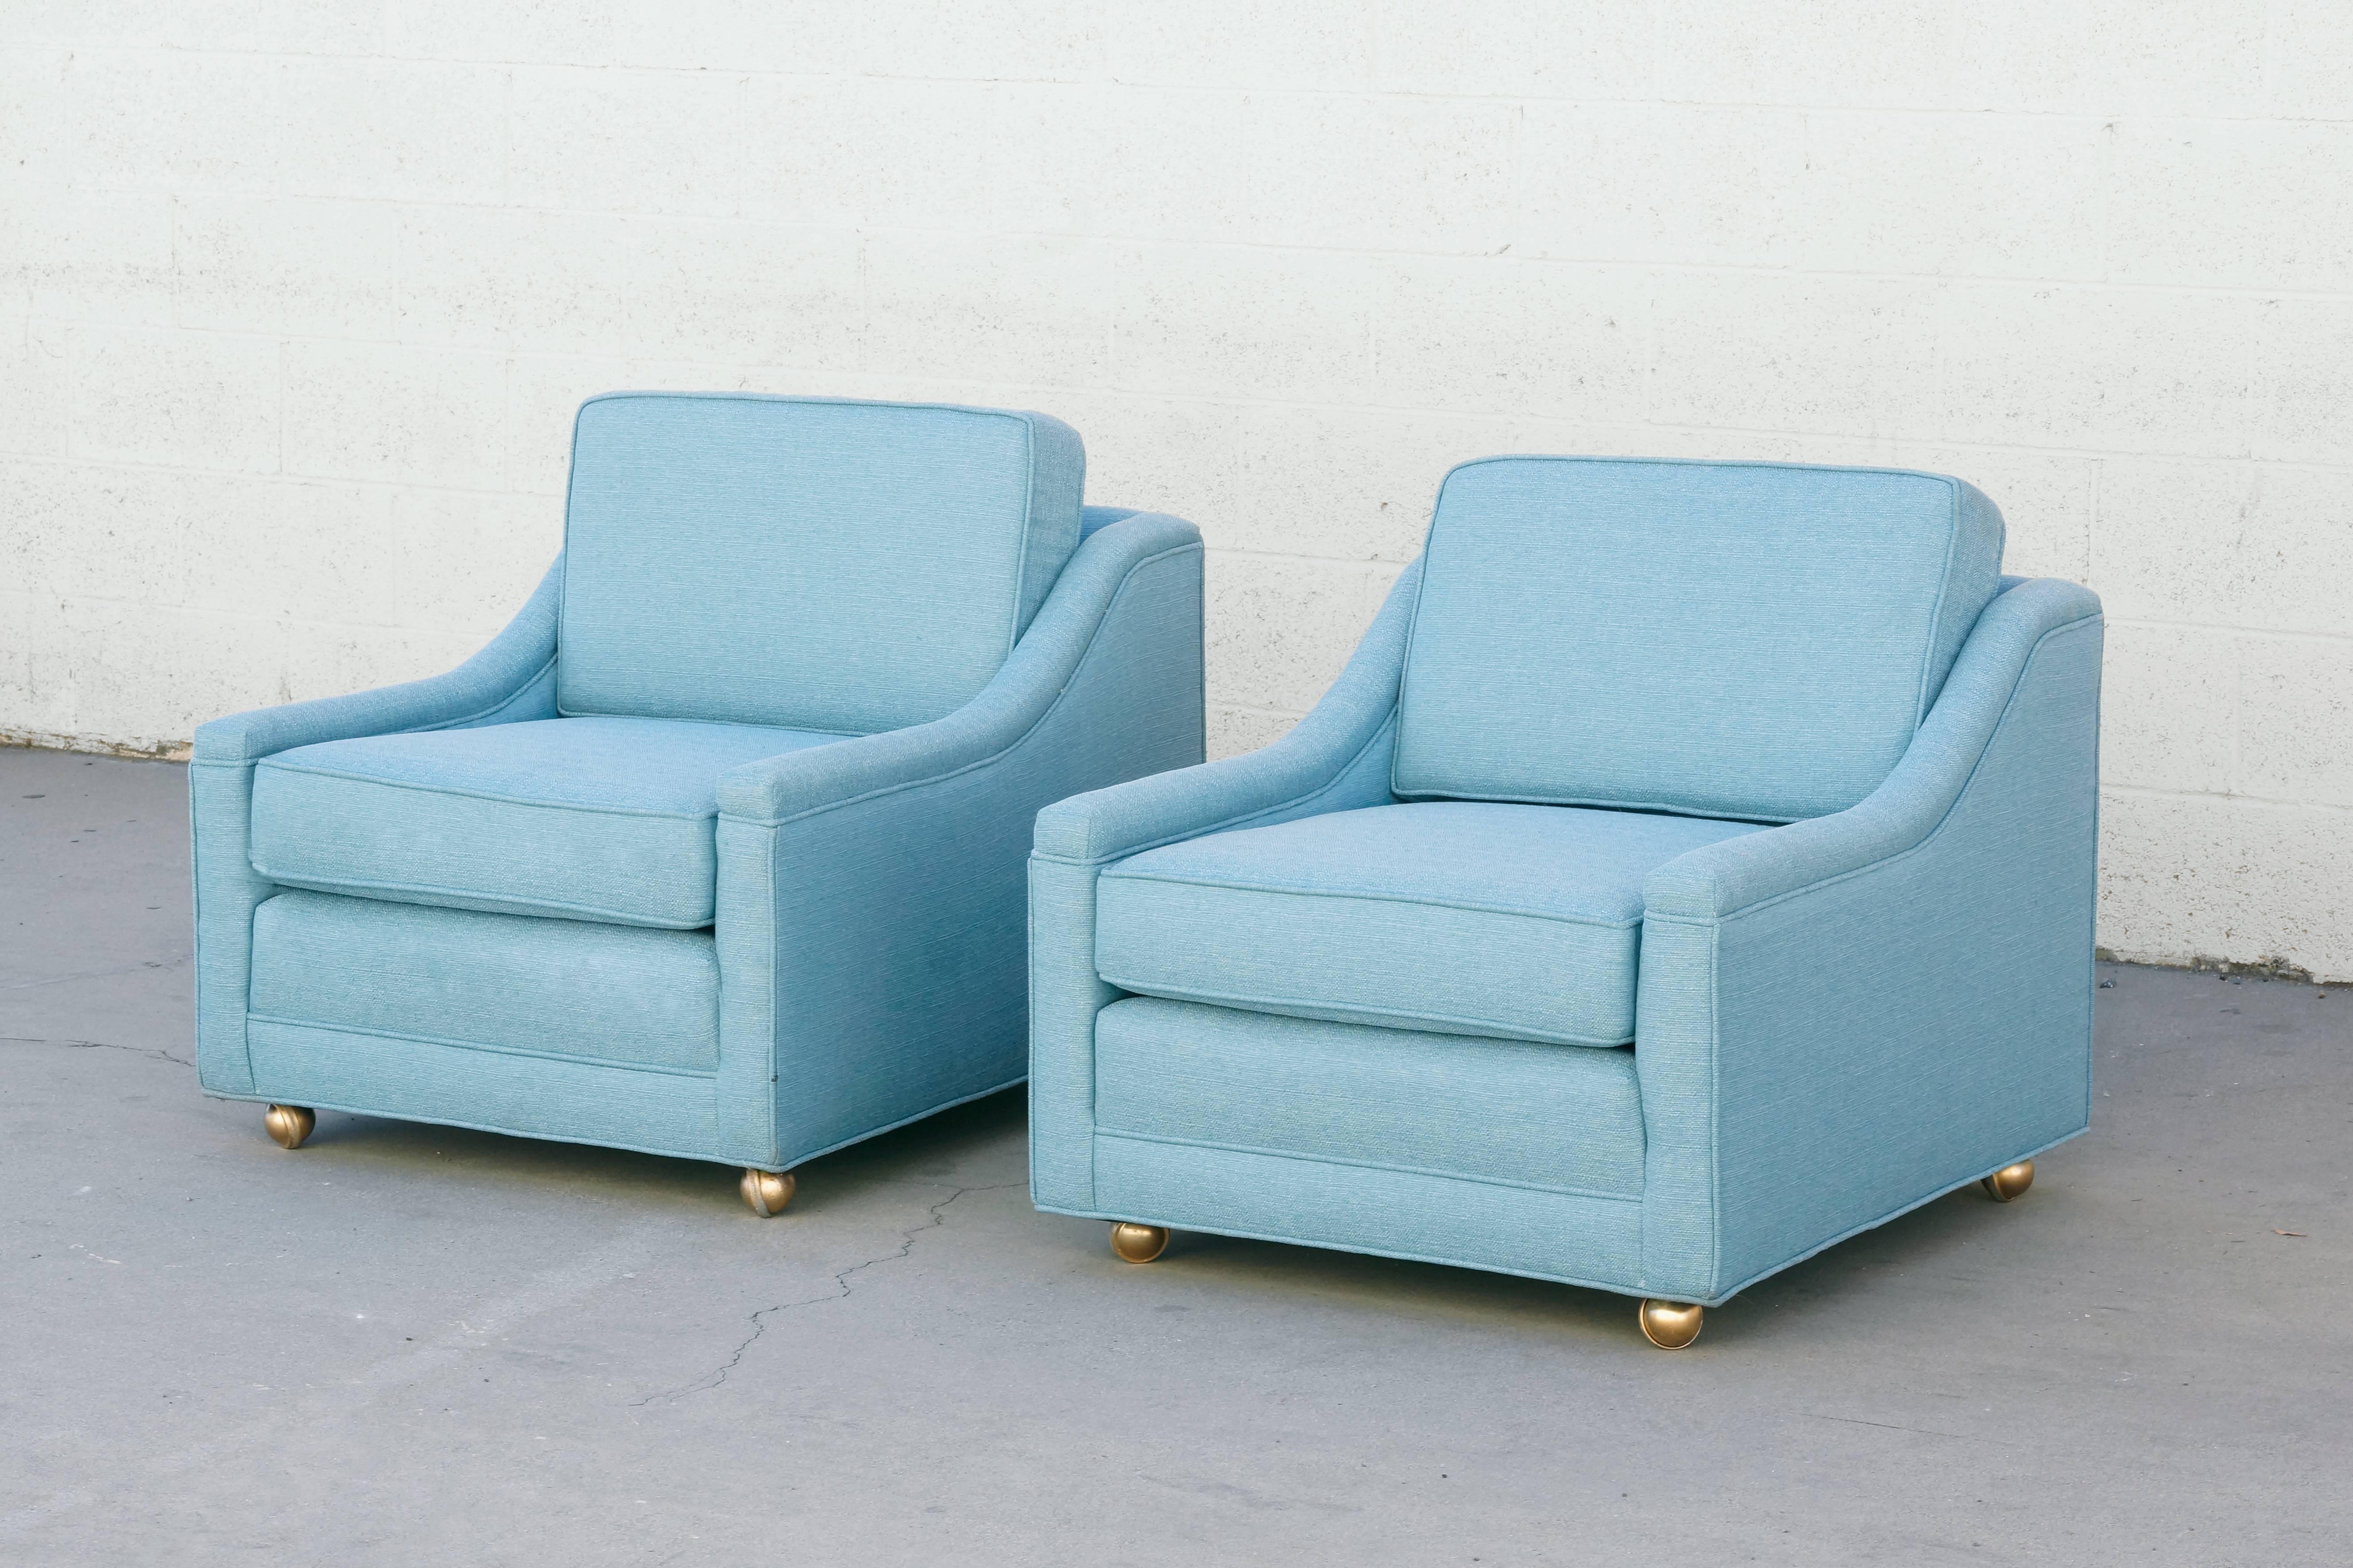 This timeless pair of 1950s loungers are as comfortable as they are easy on the eyes. We've reupholstered them in a sky blue high quality woven fabric. Original hooded brass casters, newly refinished. Oh so lovely Classic American styling.